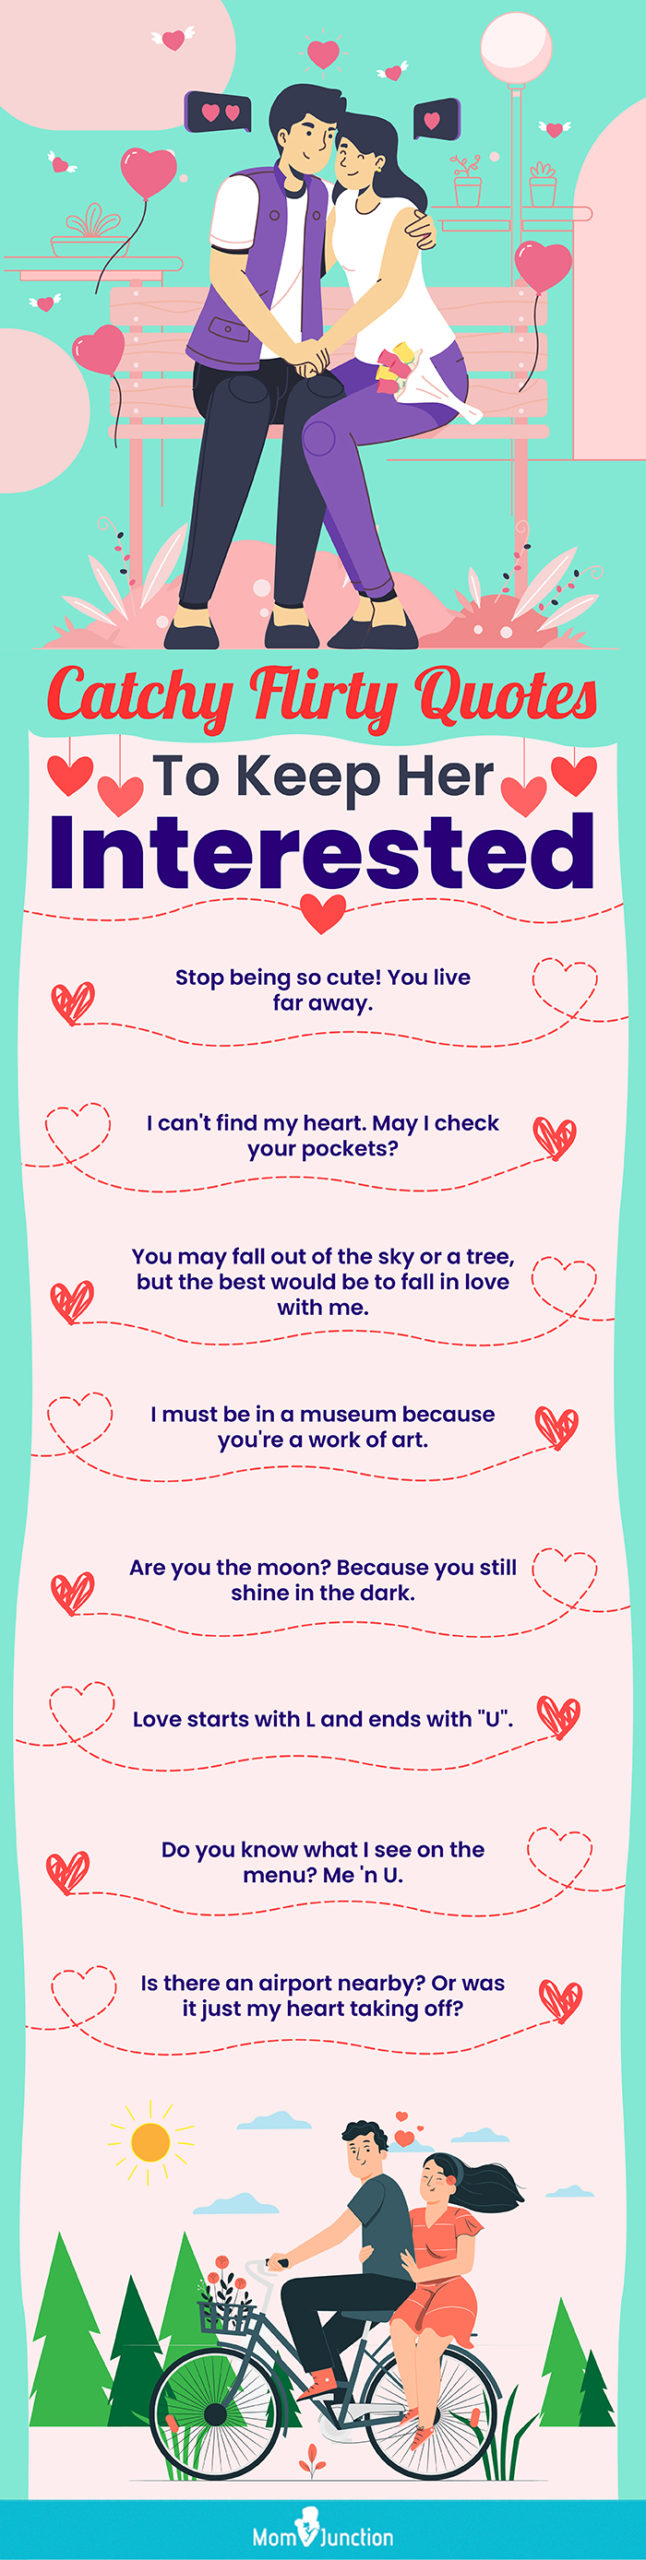 catchy flirty quotes to keep her interested [infographic]